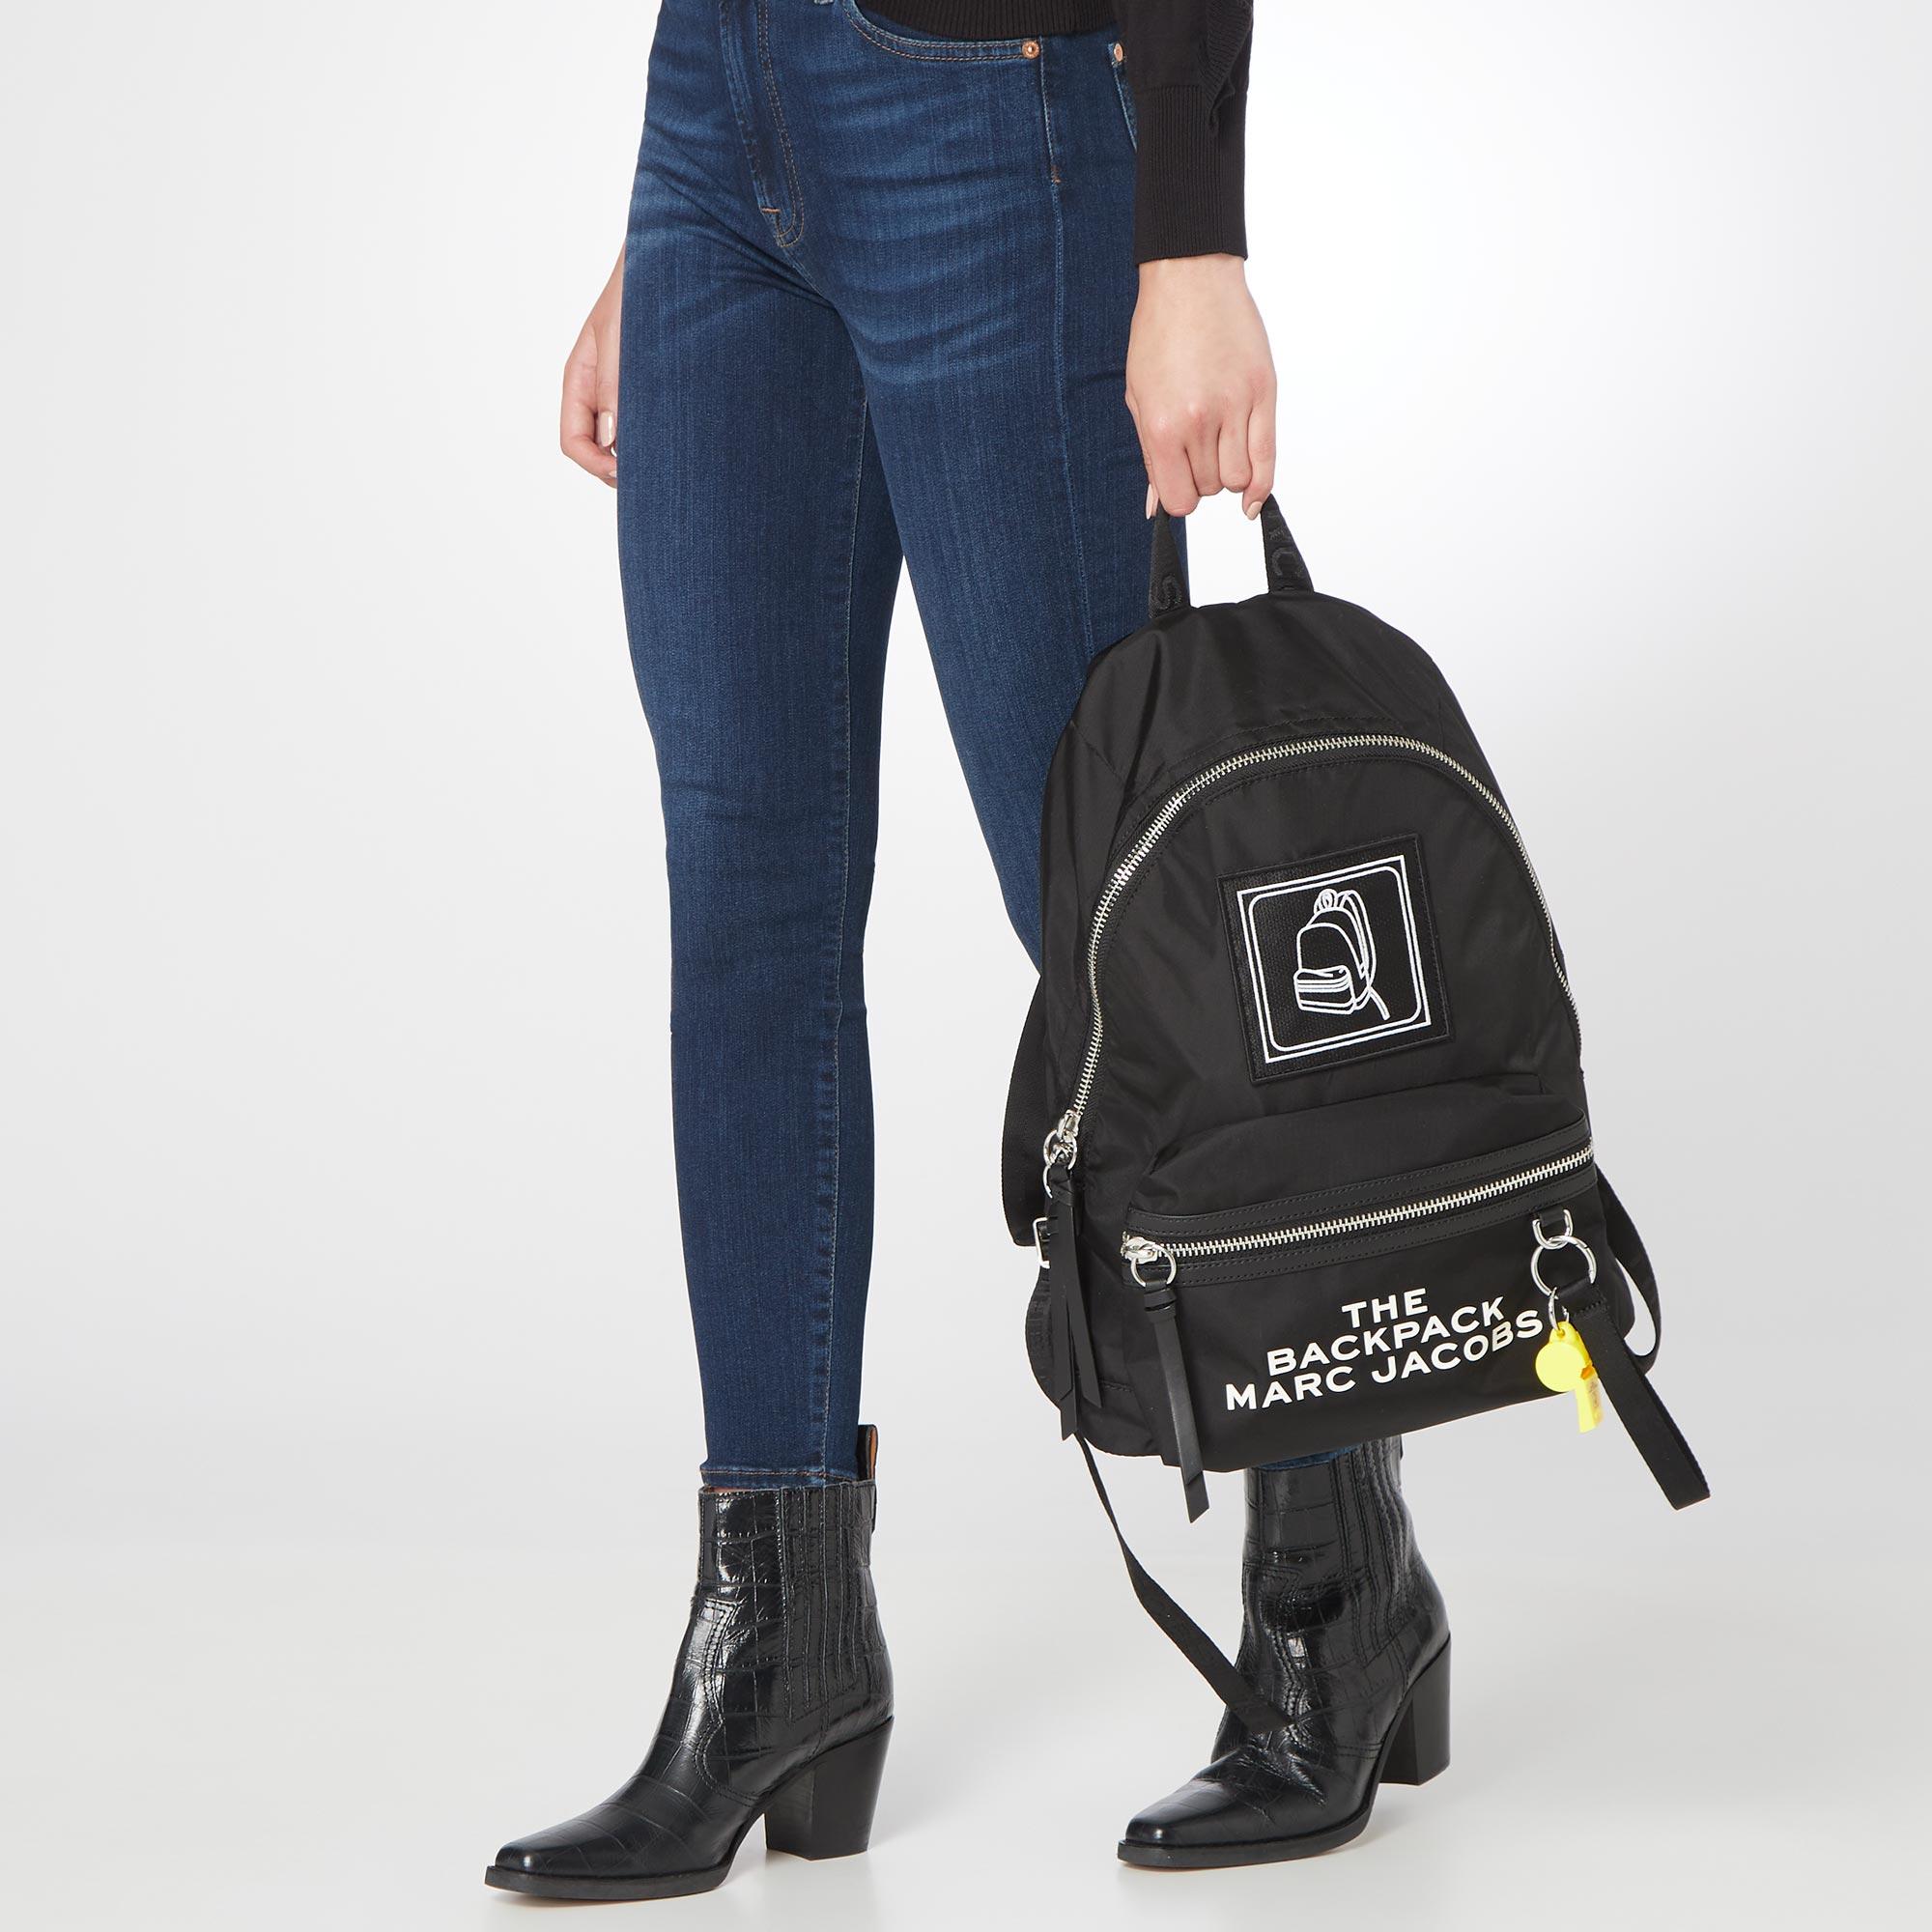 The Pictogram Backpack